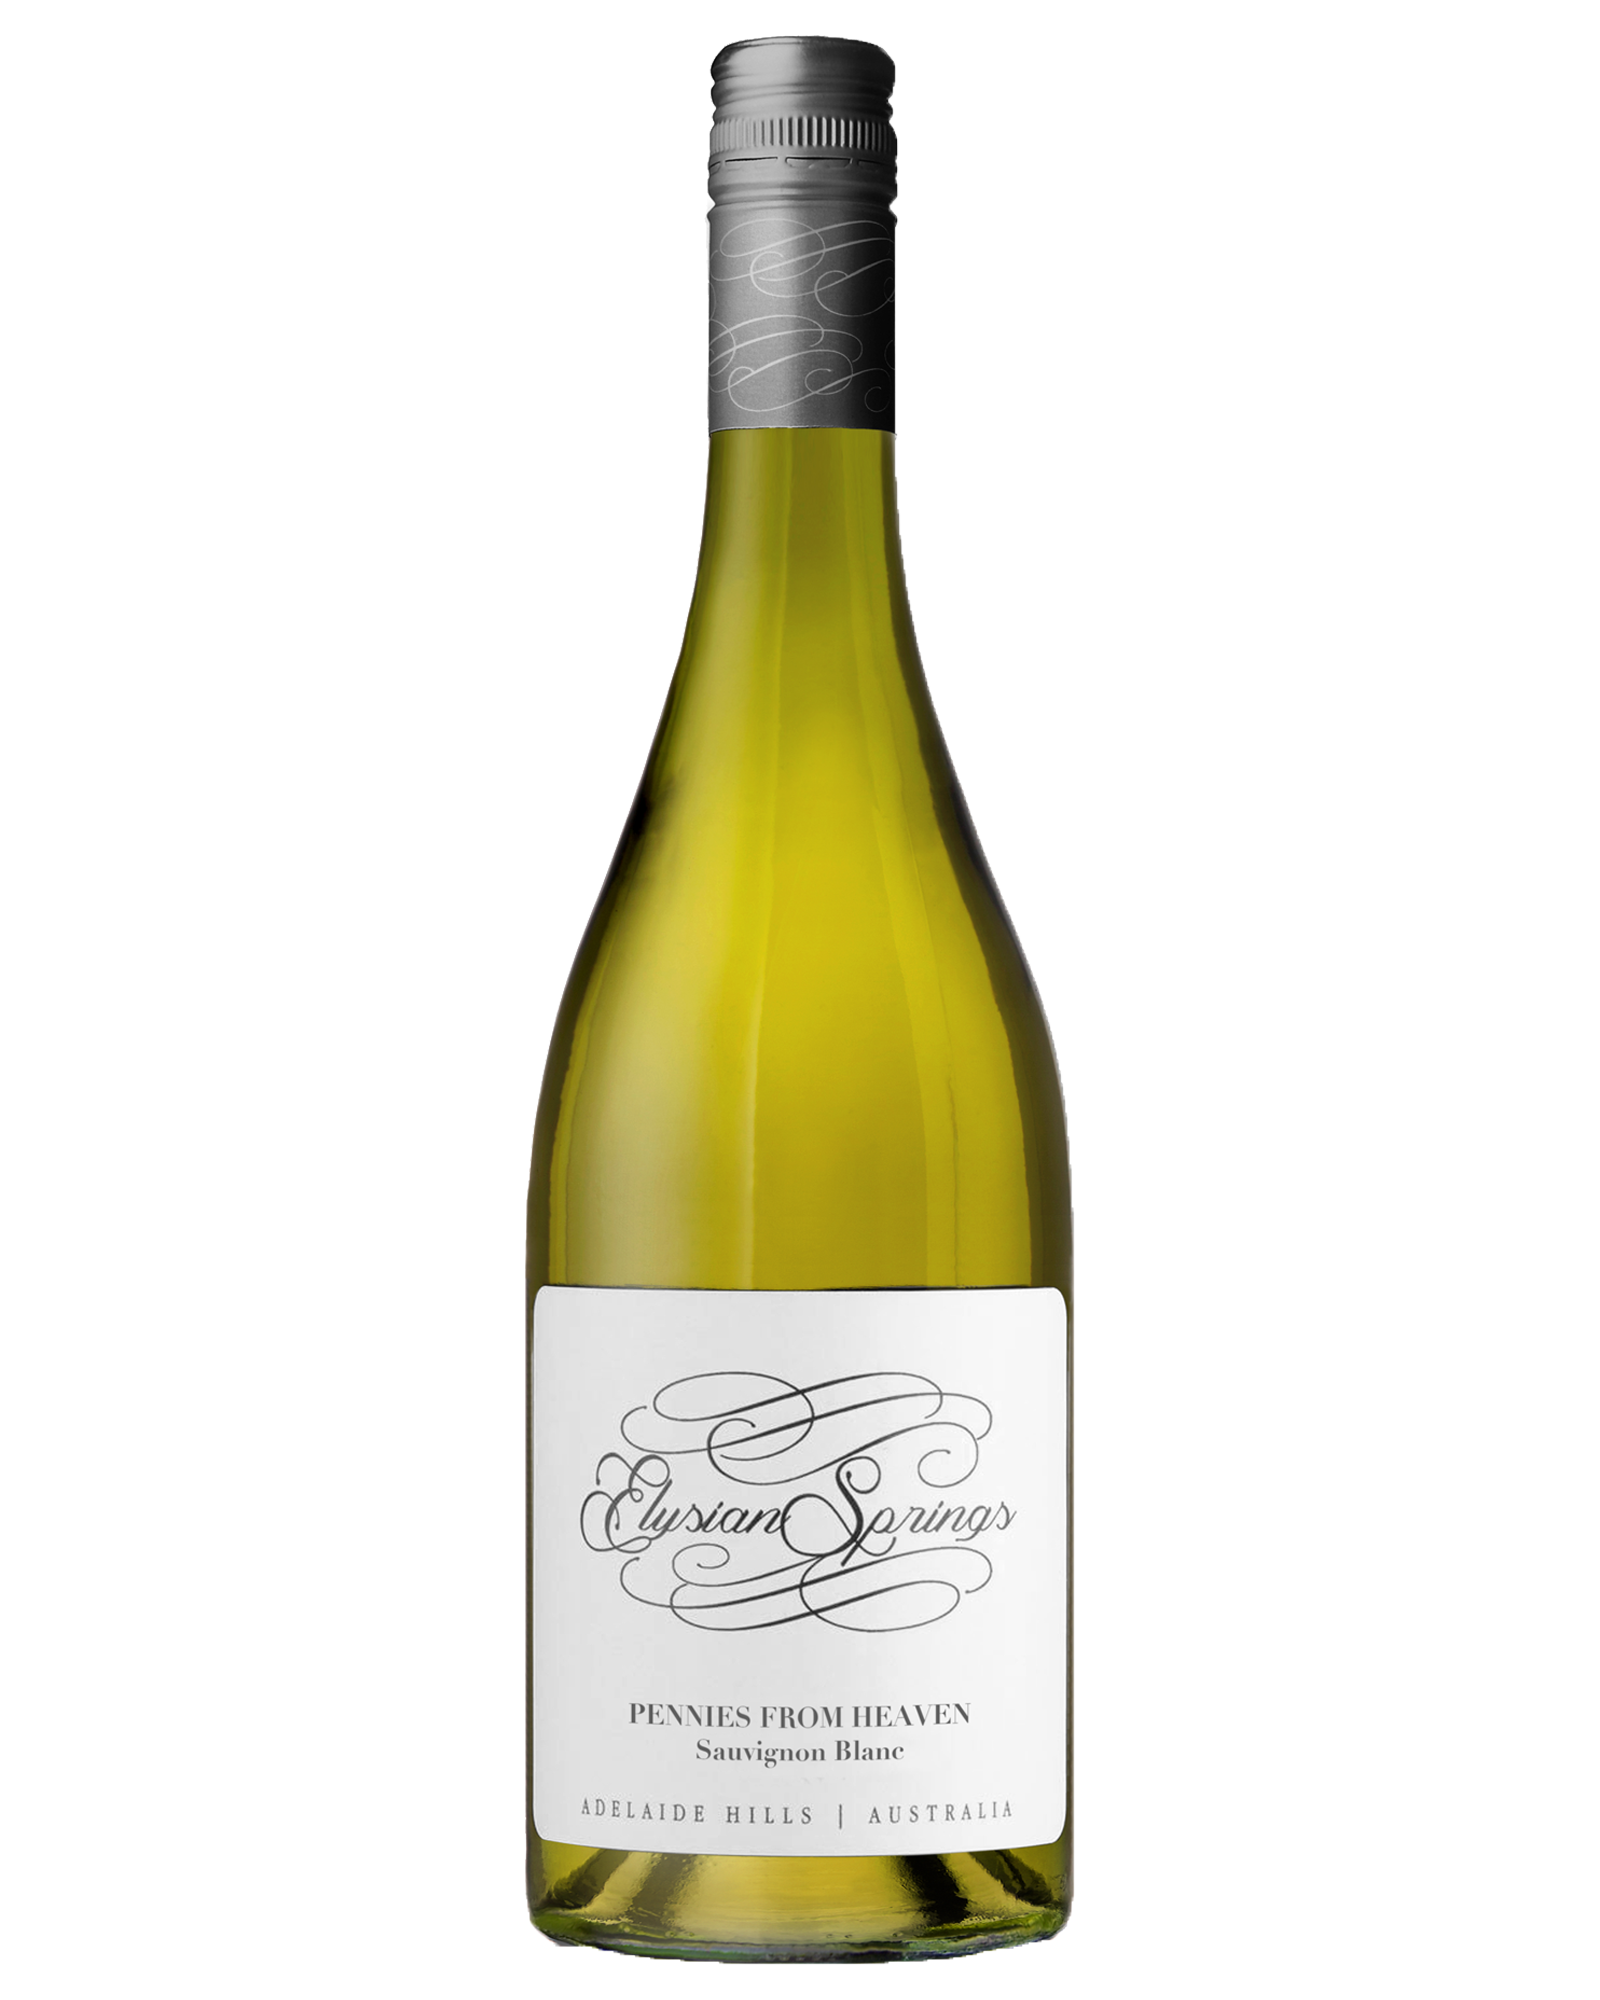 Elysian Springs Pennies From Heaven Adelaide Hills Sauvignon Blanc 2018